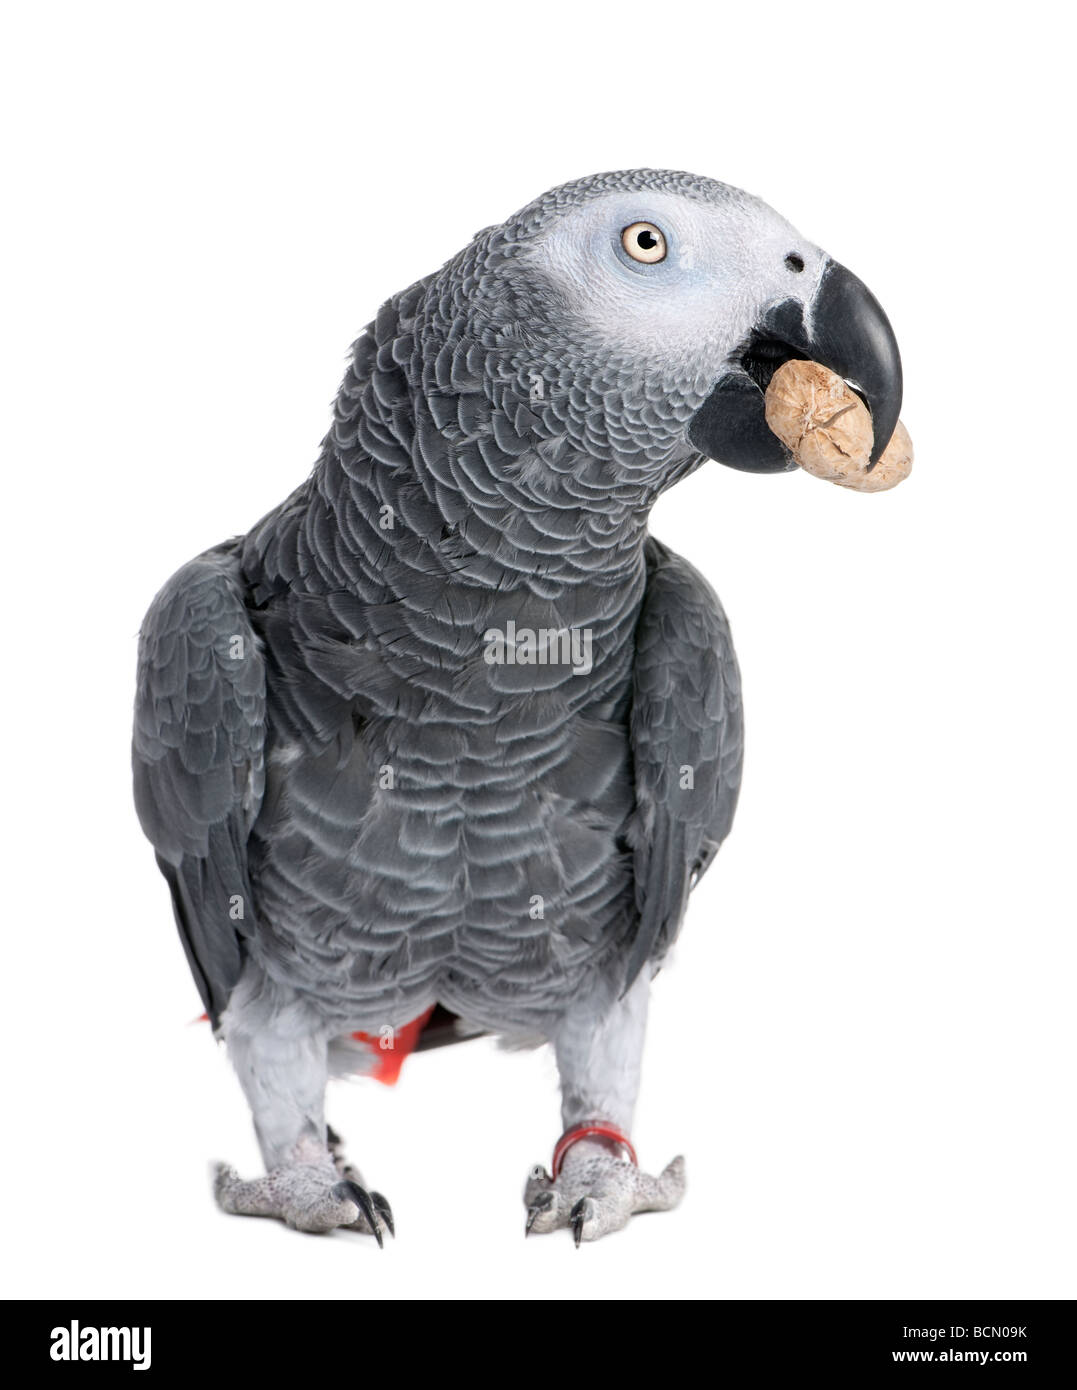 African Grey Parrot eating a peanut, Psittacus erithacus, in front of a white background, studio shot Stock Photo